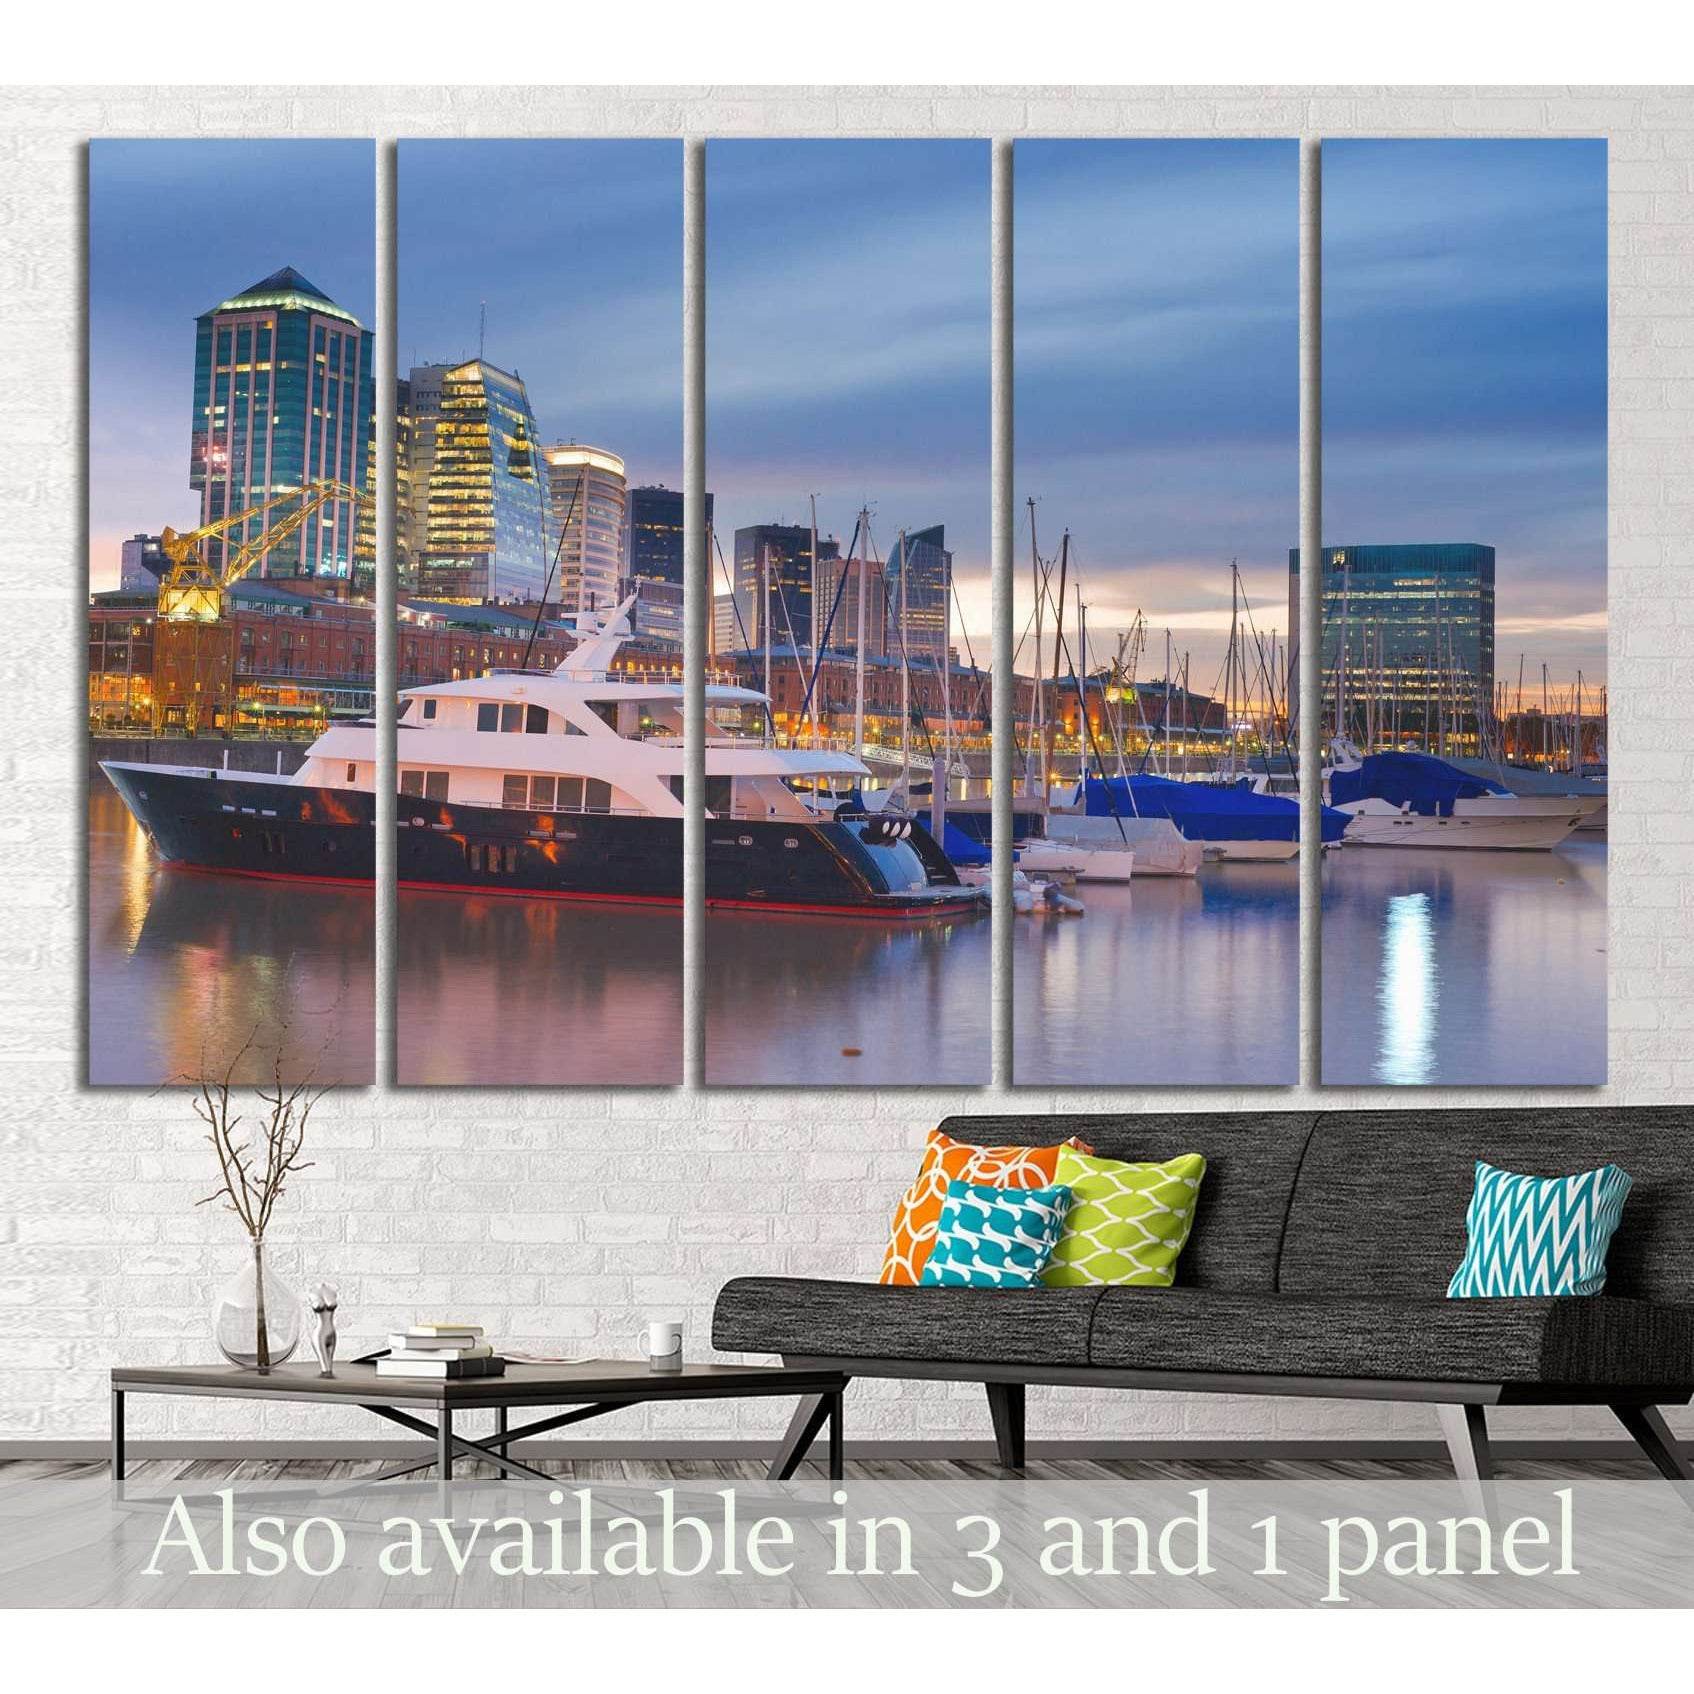 Buenos Aires Cityscape, Argentina №1143 Ready to Hang Canvas Print